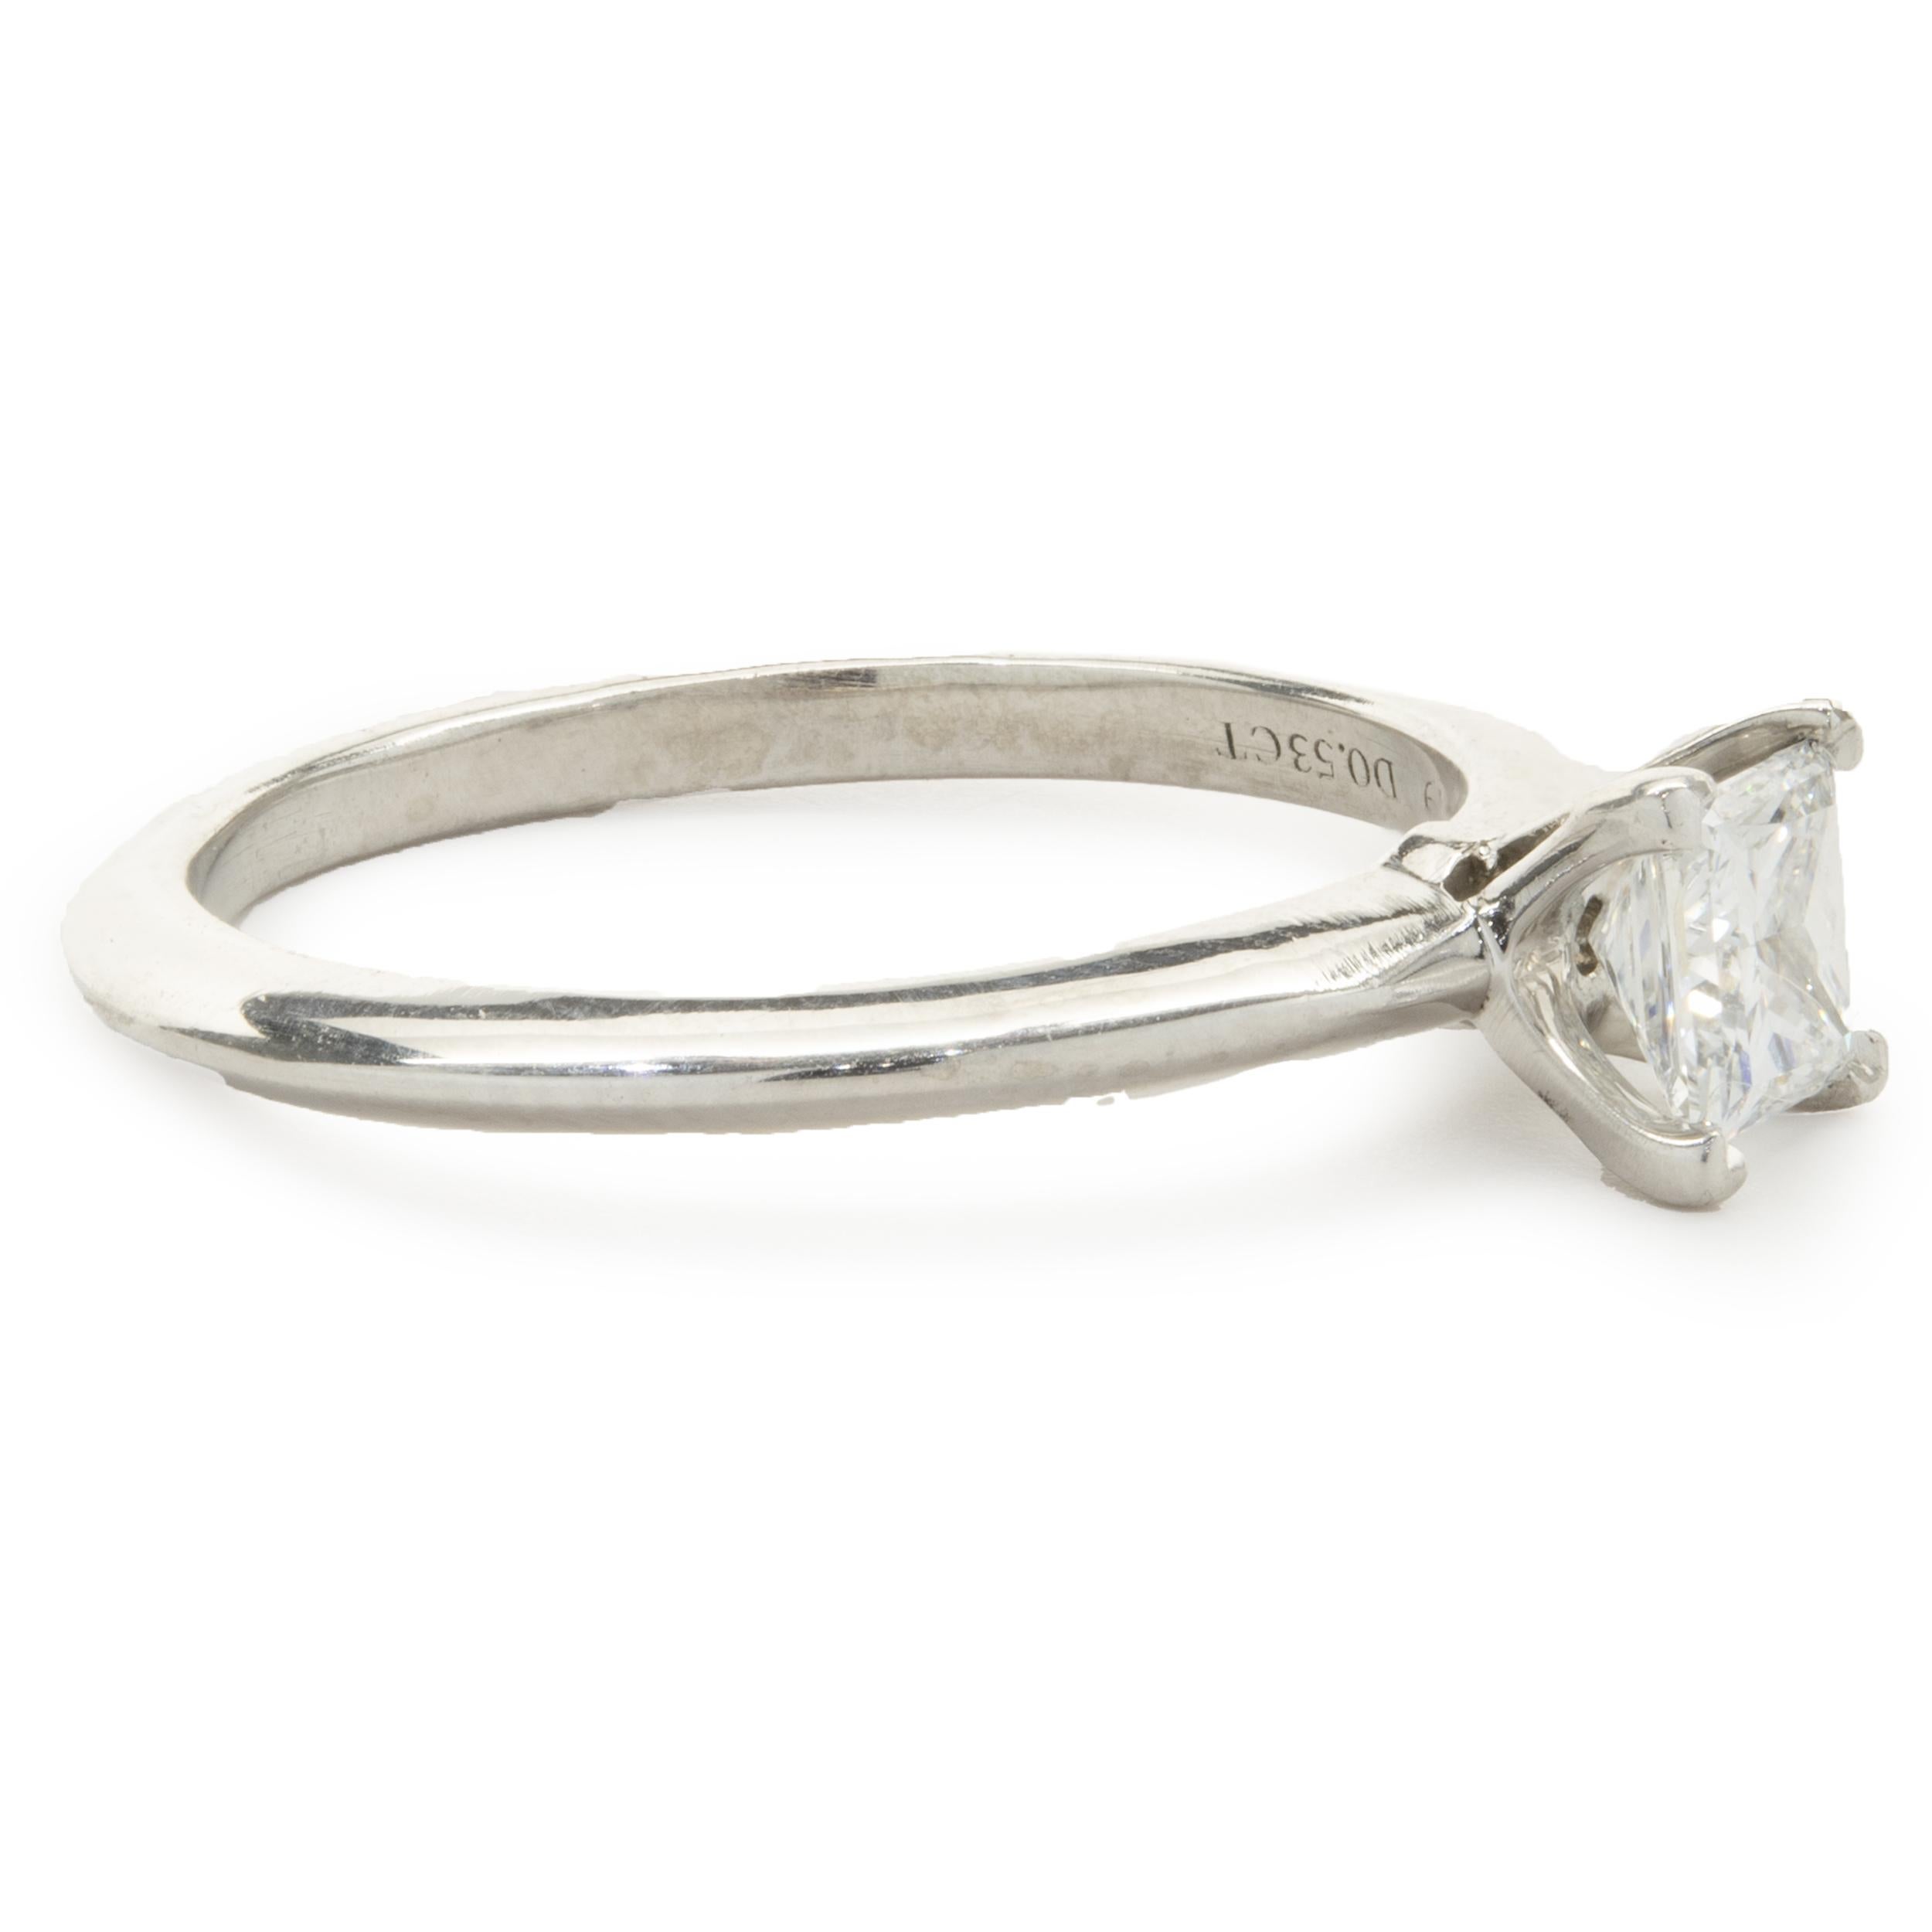 Designer: Tiffany & Co. 
Material: platinum
Diamond: 1 princess cut = .53ct
Color: H
Clarity: VS2
Size: 7
Dimensions: ring top measures 5.70mm wide
Weight: 4.64 grams